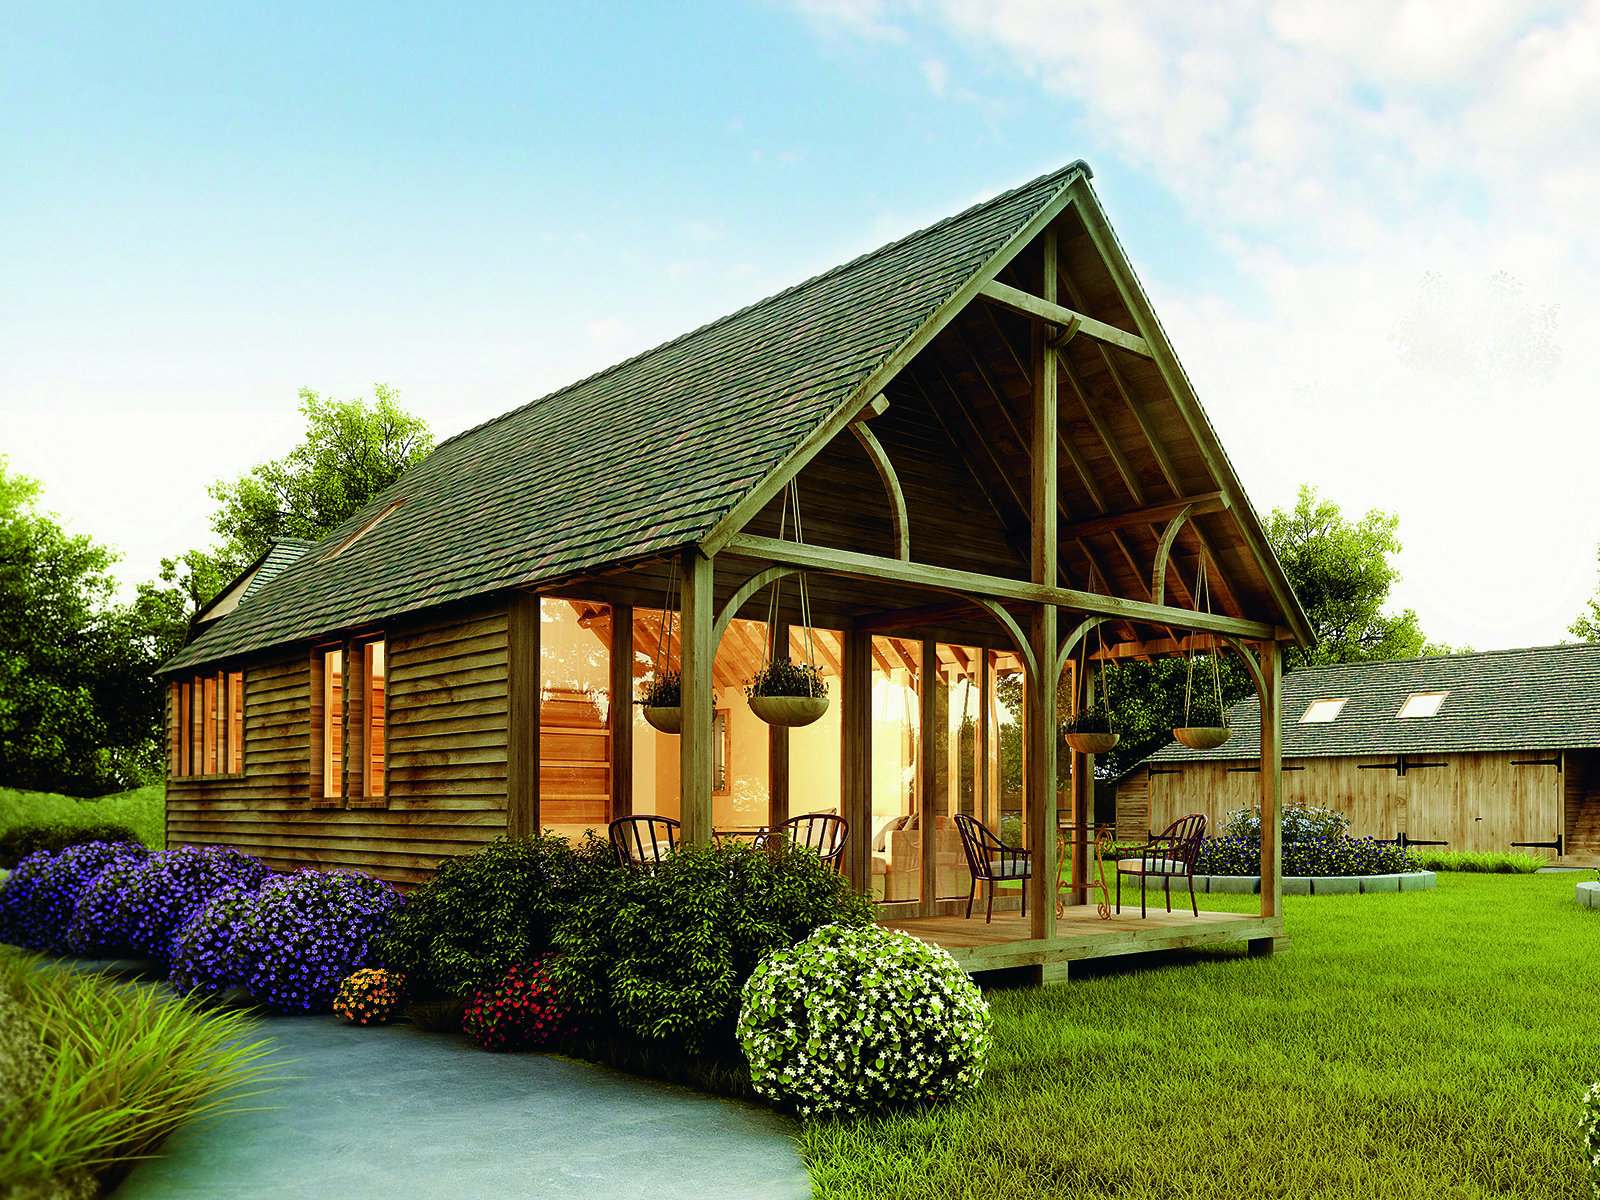 CGI image of wooden cabin from the outside